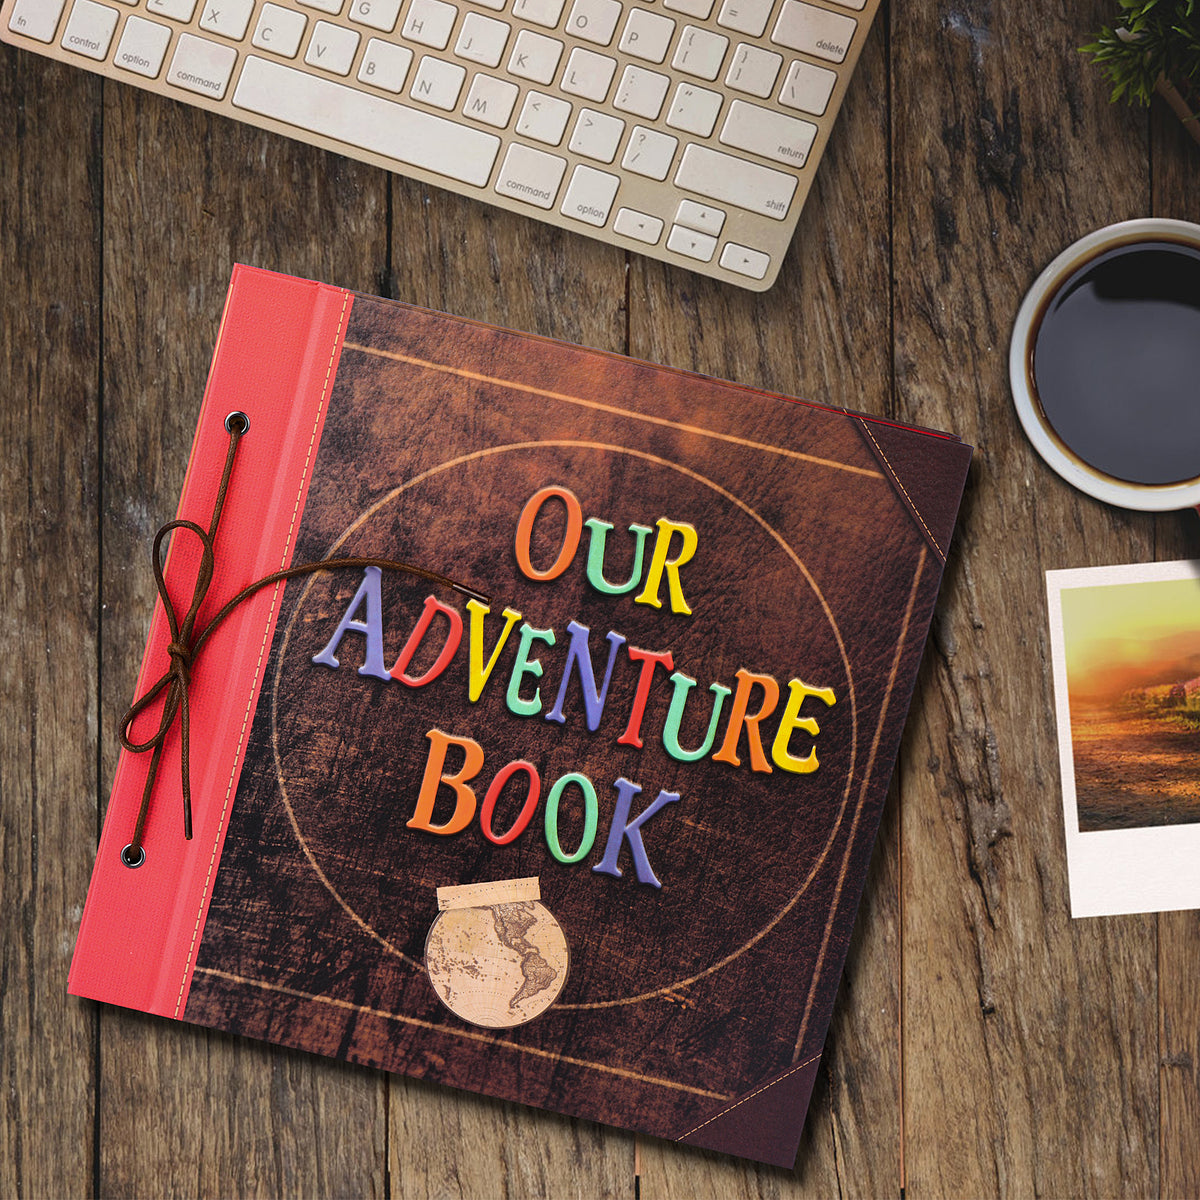 12x12 Inch Large Our Adventure Book Scrapbook Album, 60 Pages